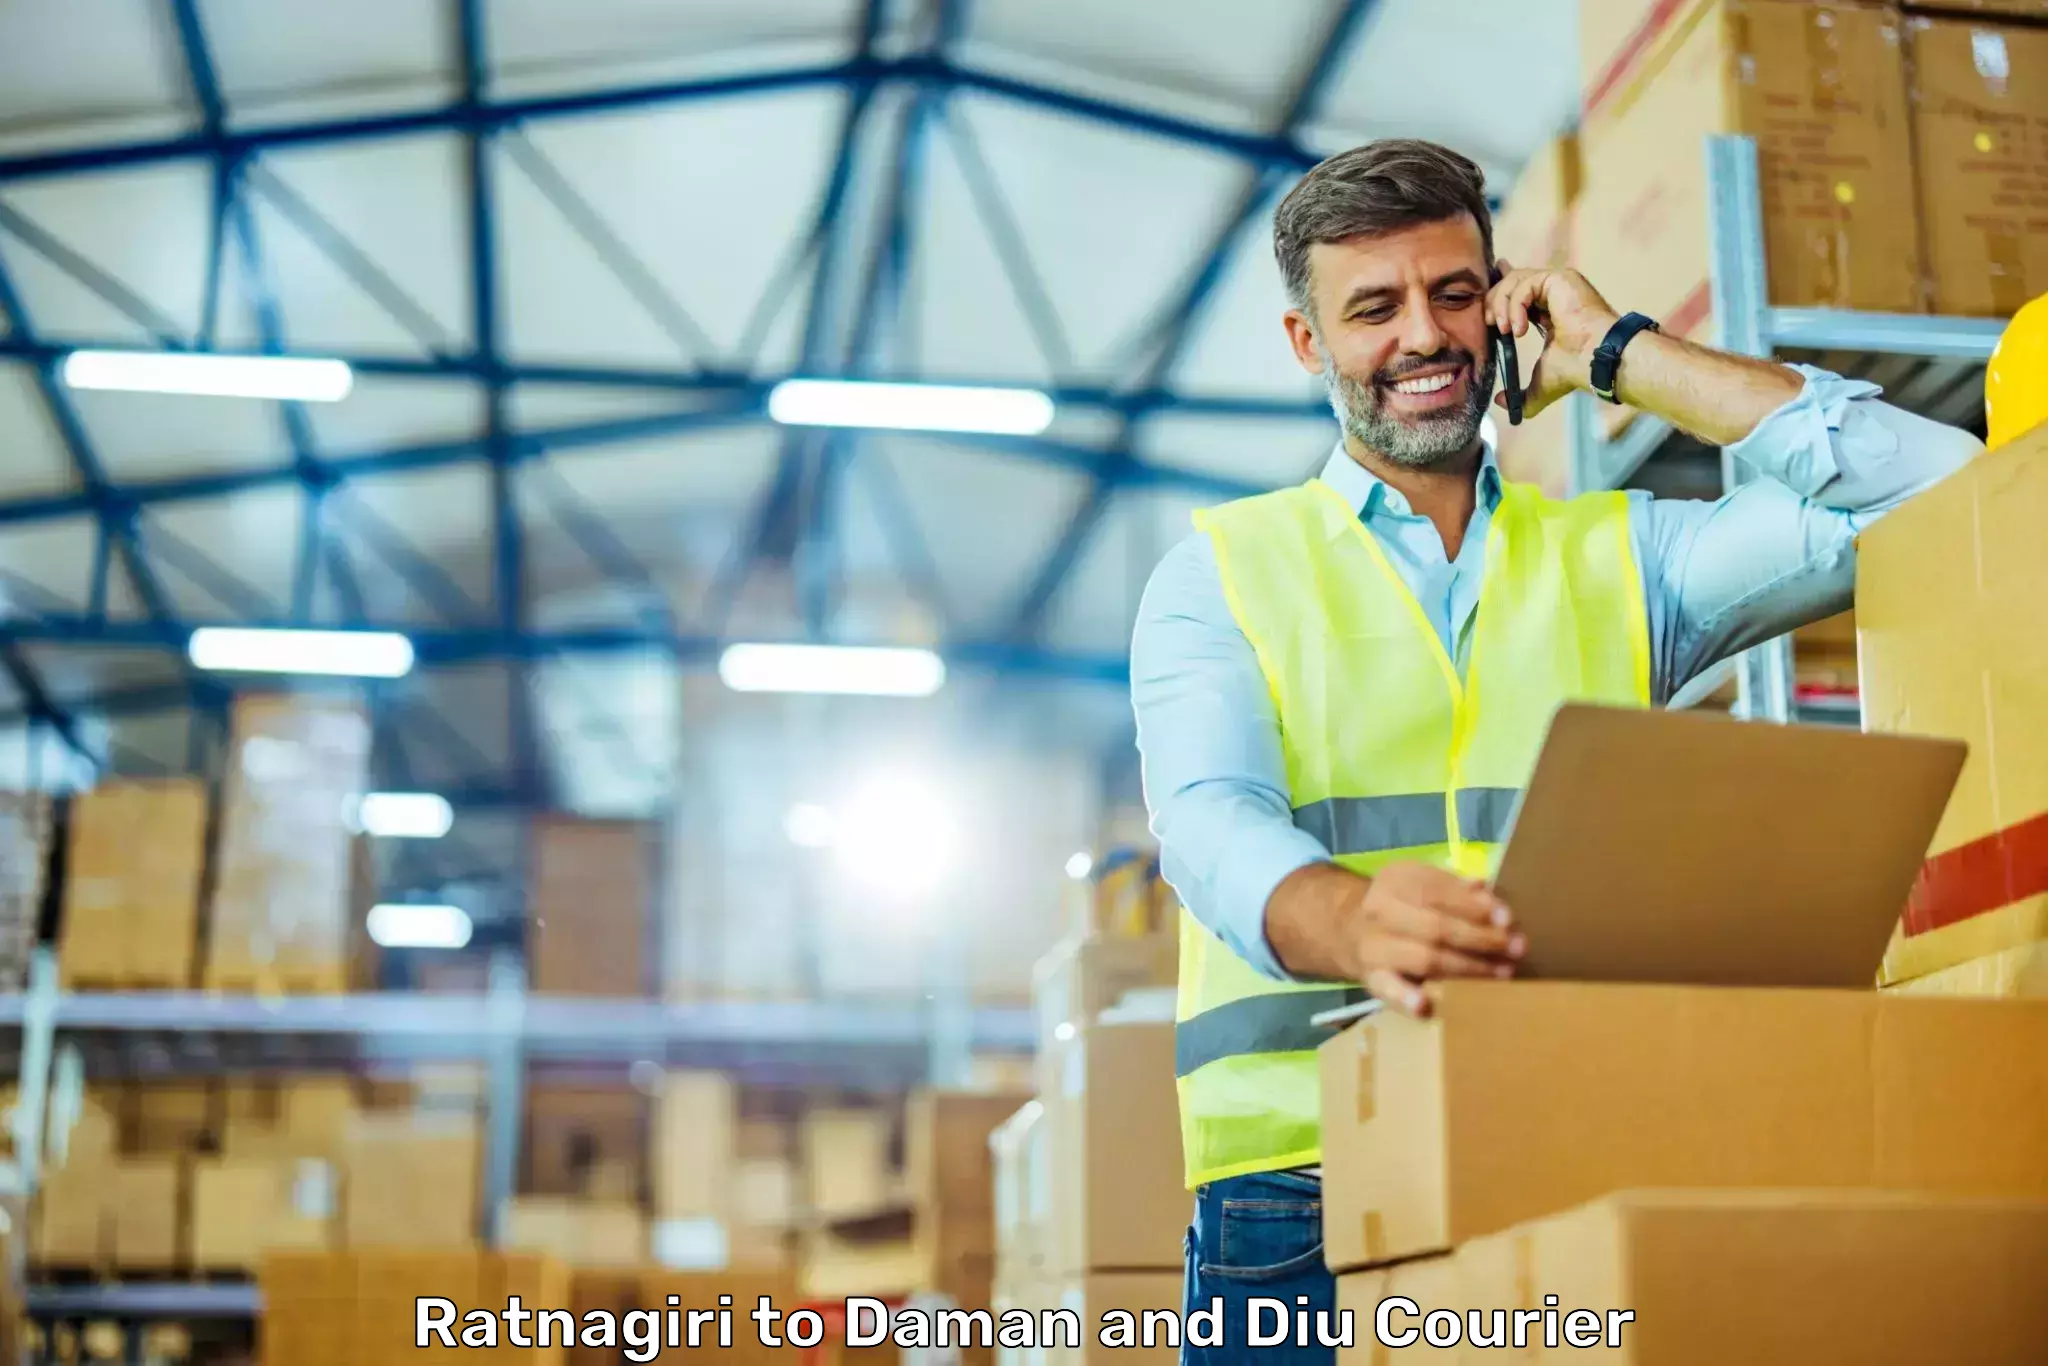 State-of-the-art courier technology Ratnagiri to Daman and Diu